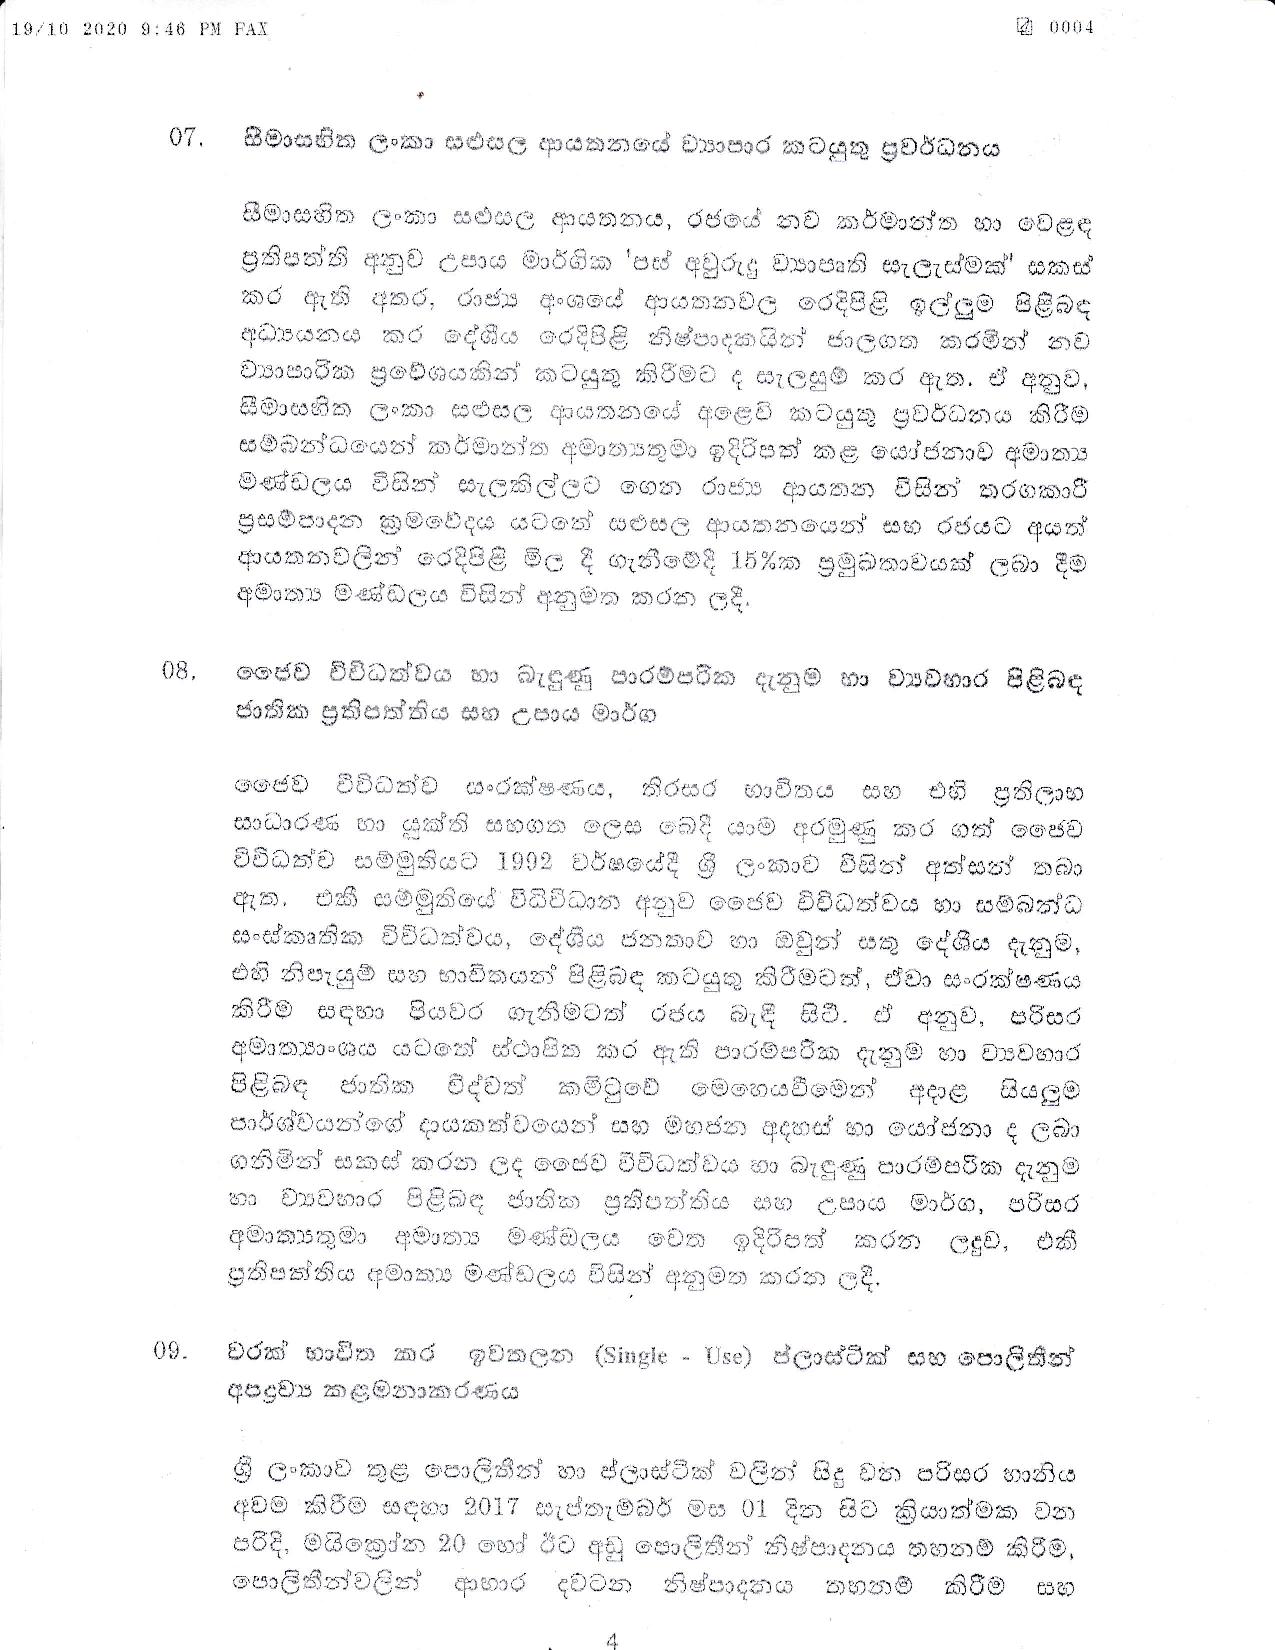 Cabinet Decision on 19.10.2020 page 004